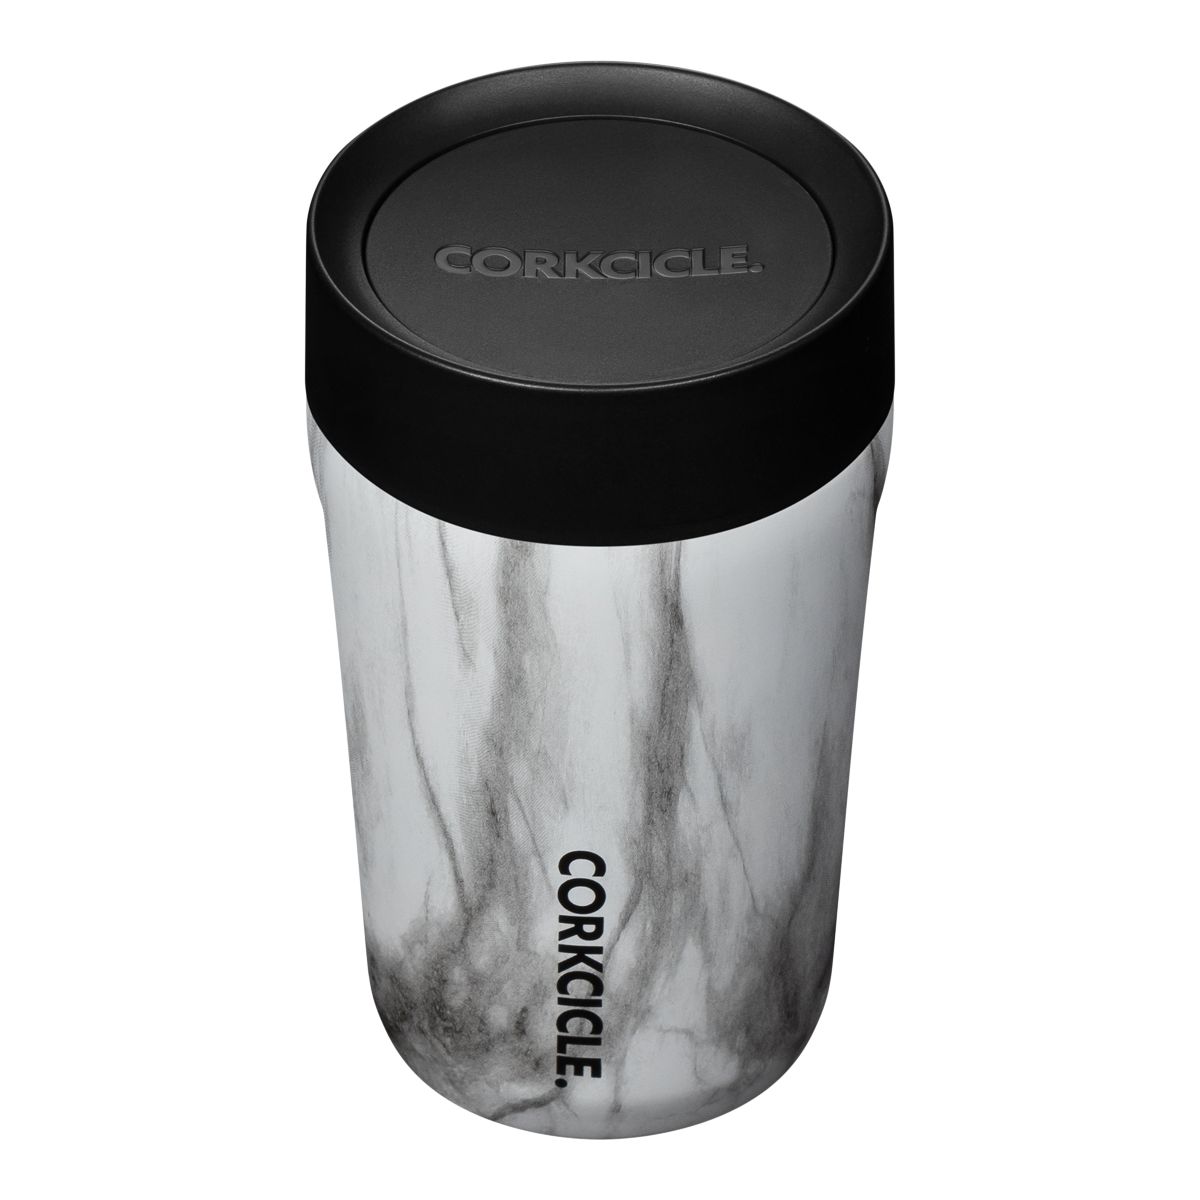 Corkcicle Commuter oz Mug Sip Lid Insulated Stainless Steel Leak Proof